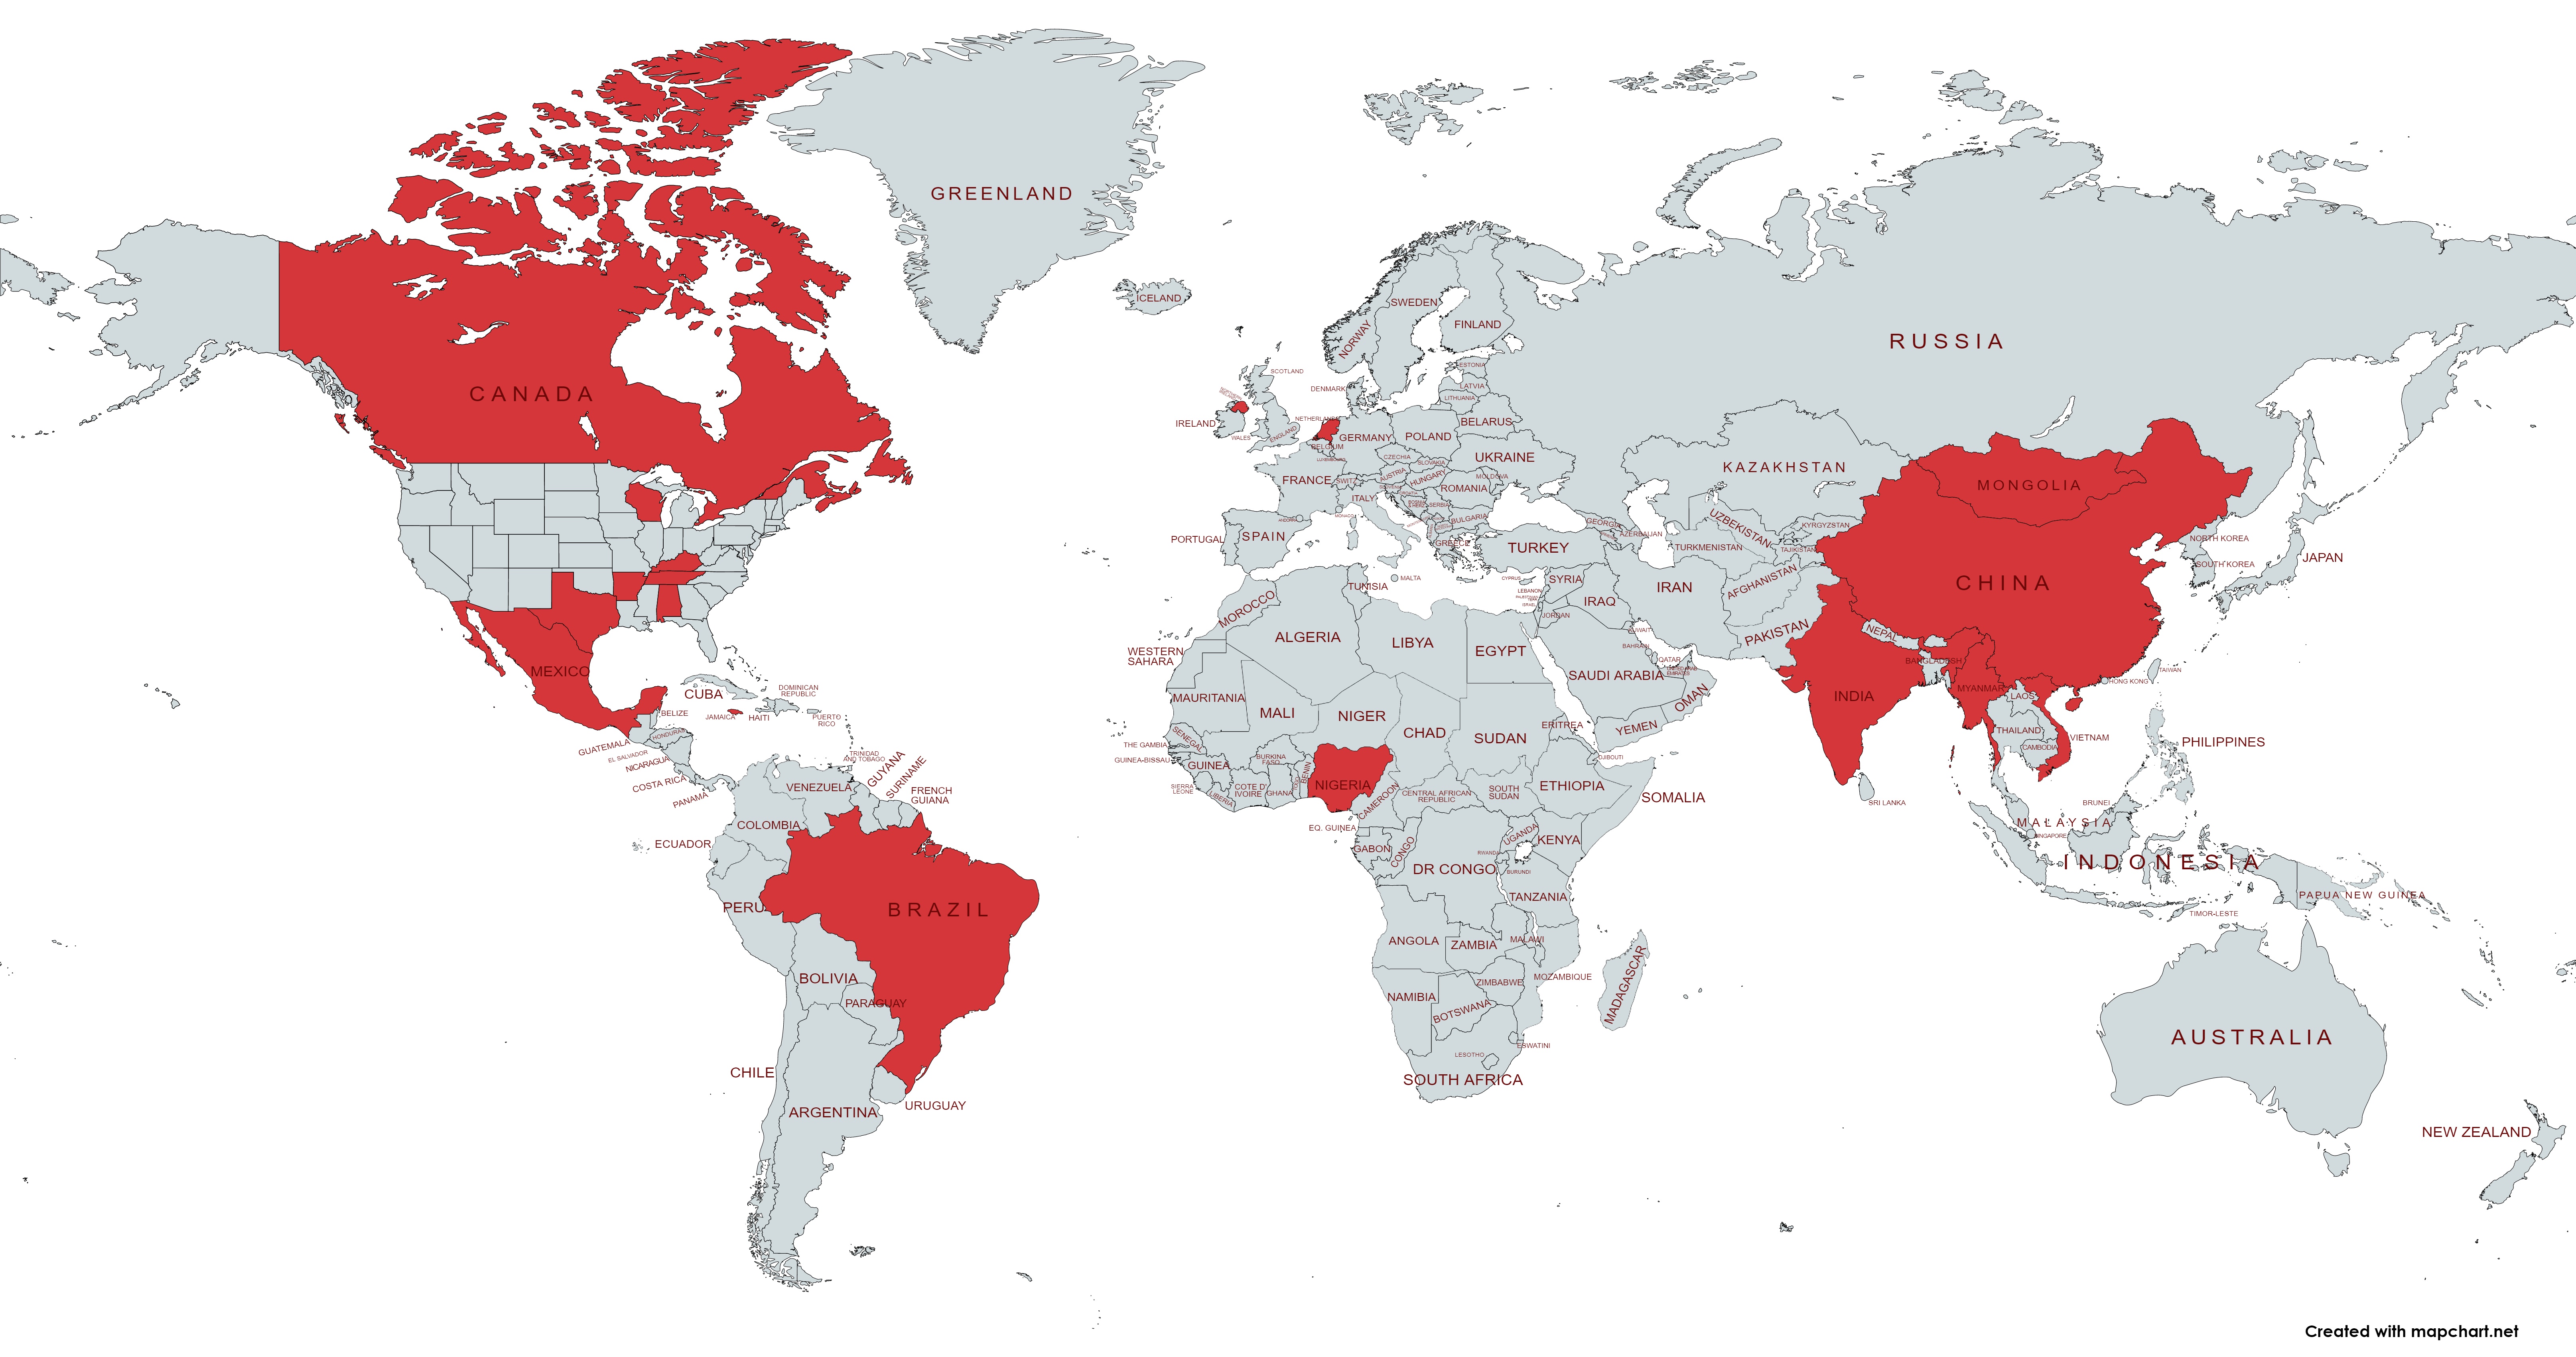 a world map indicating home countries of some of the IPAs